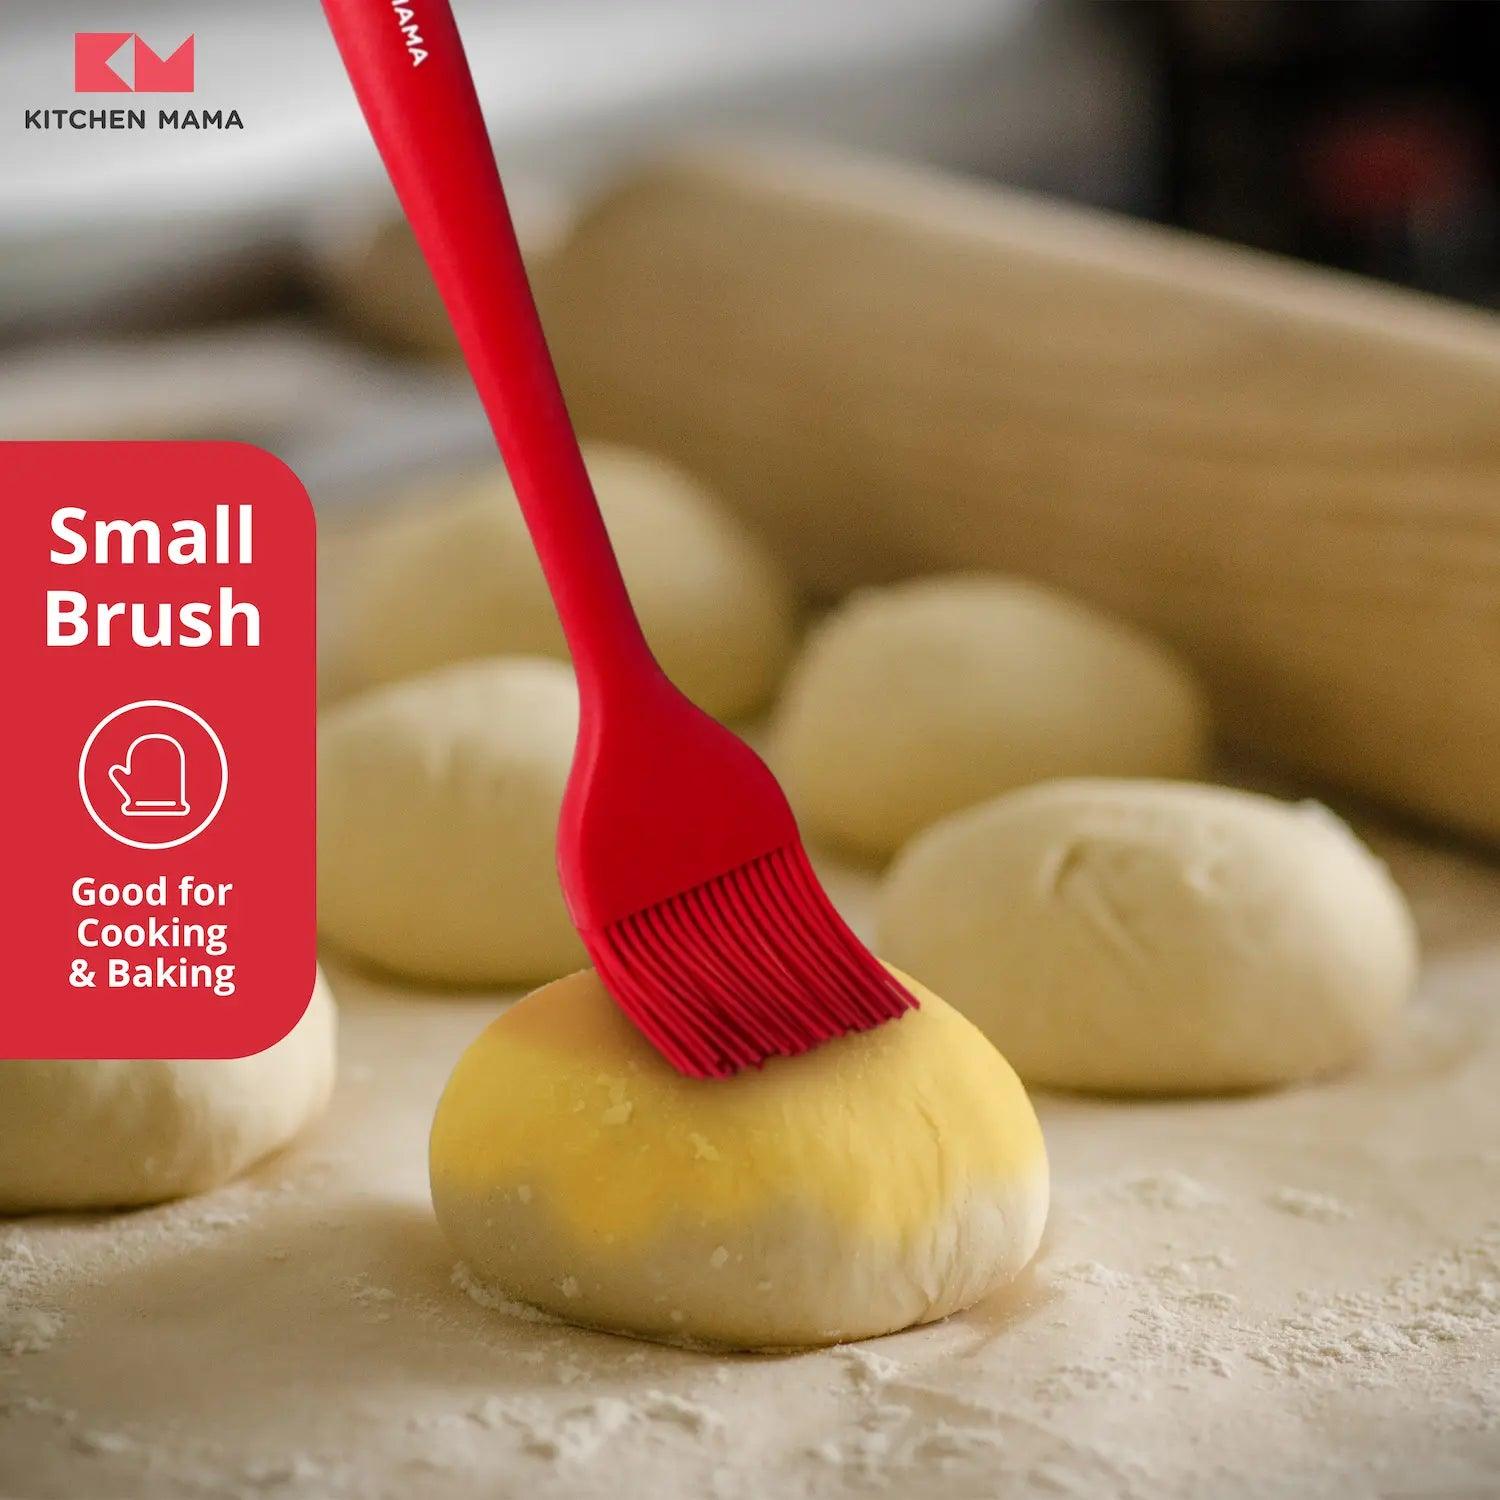 Why You Need to Buy a Better Pastry Brush